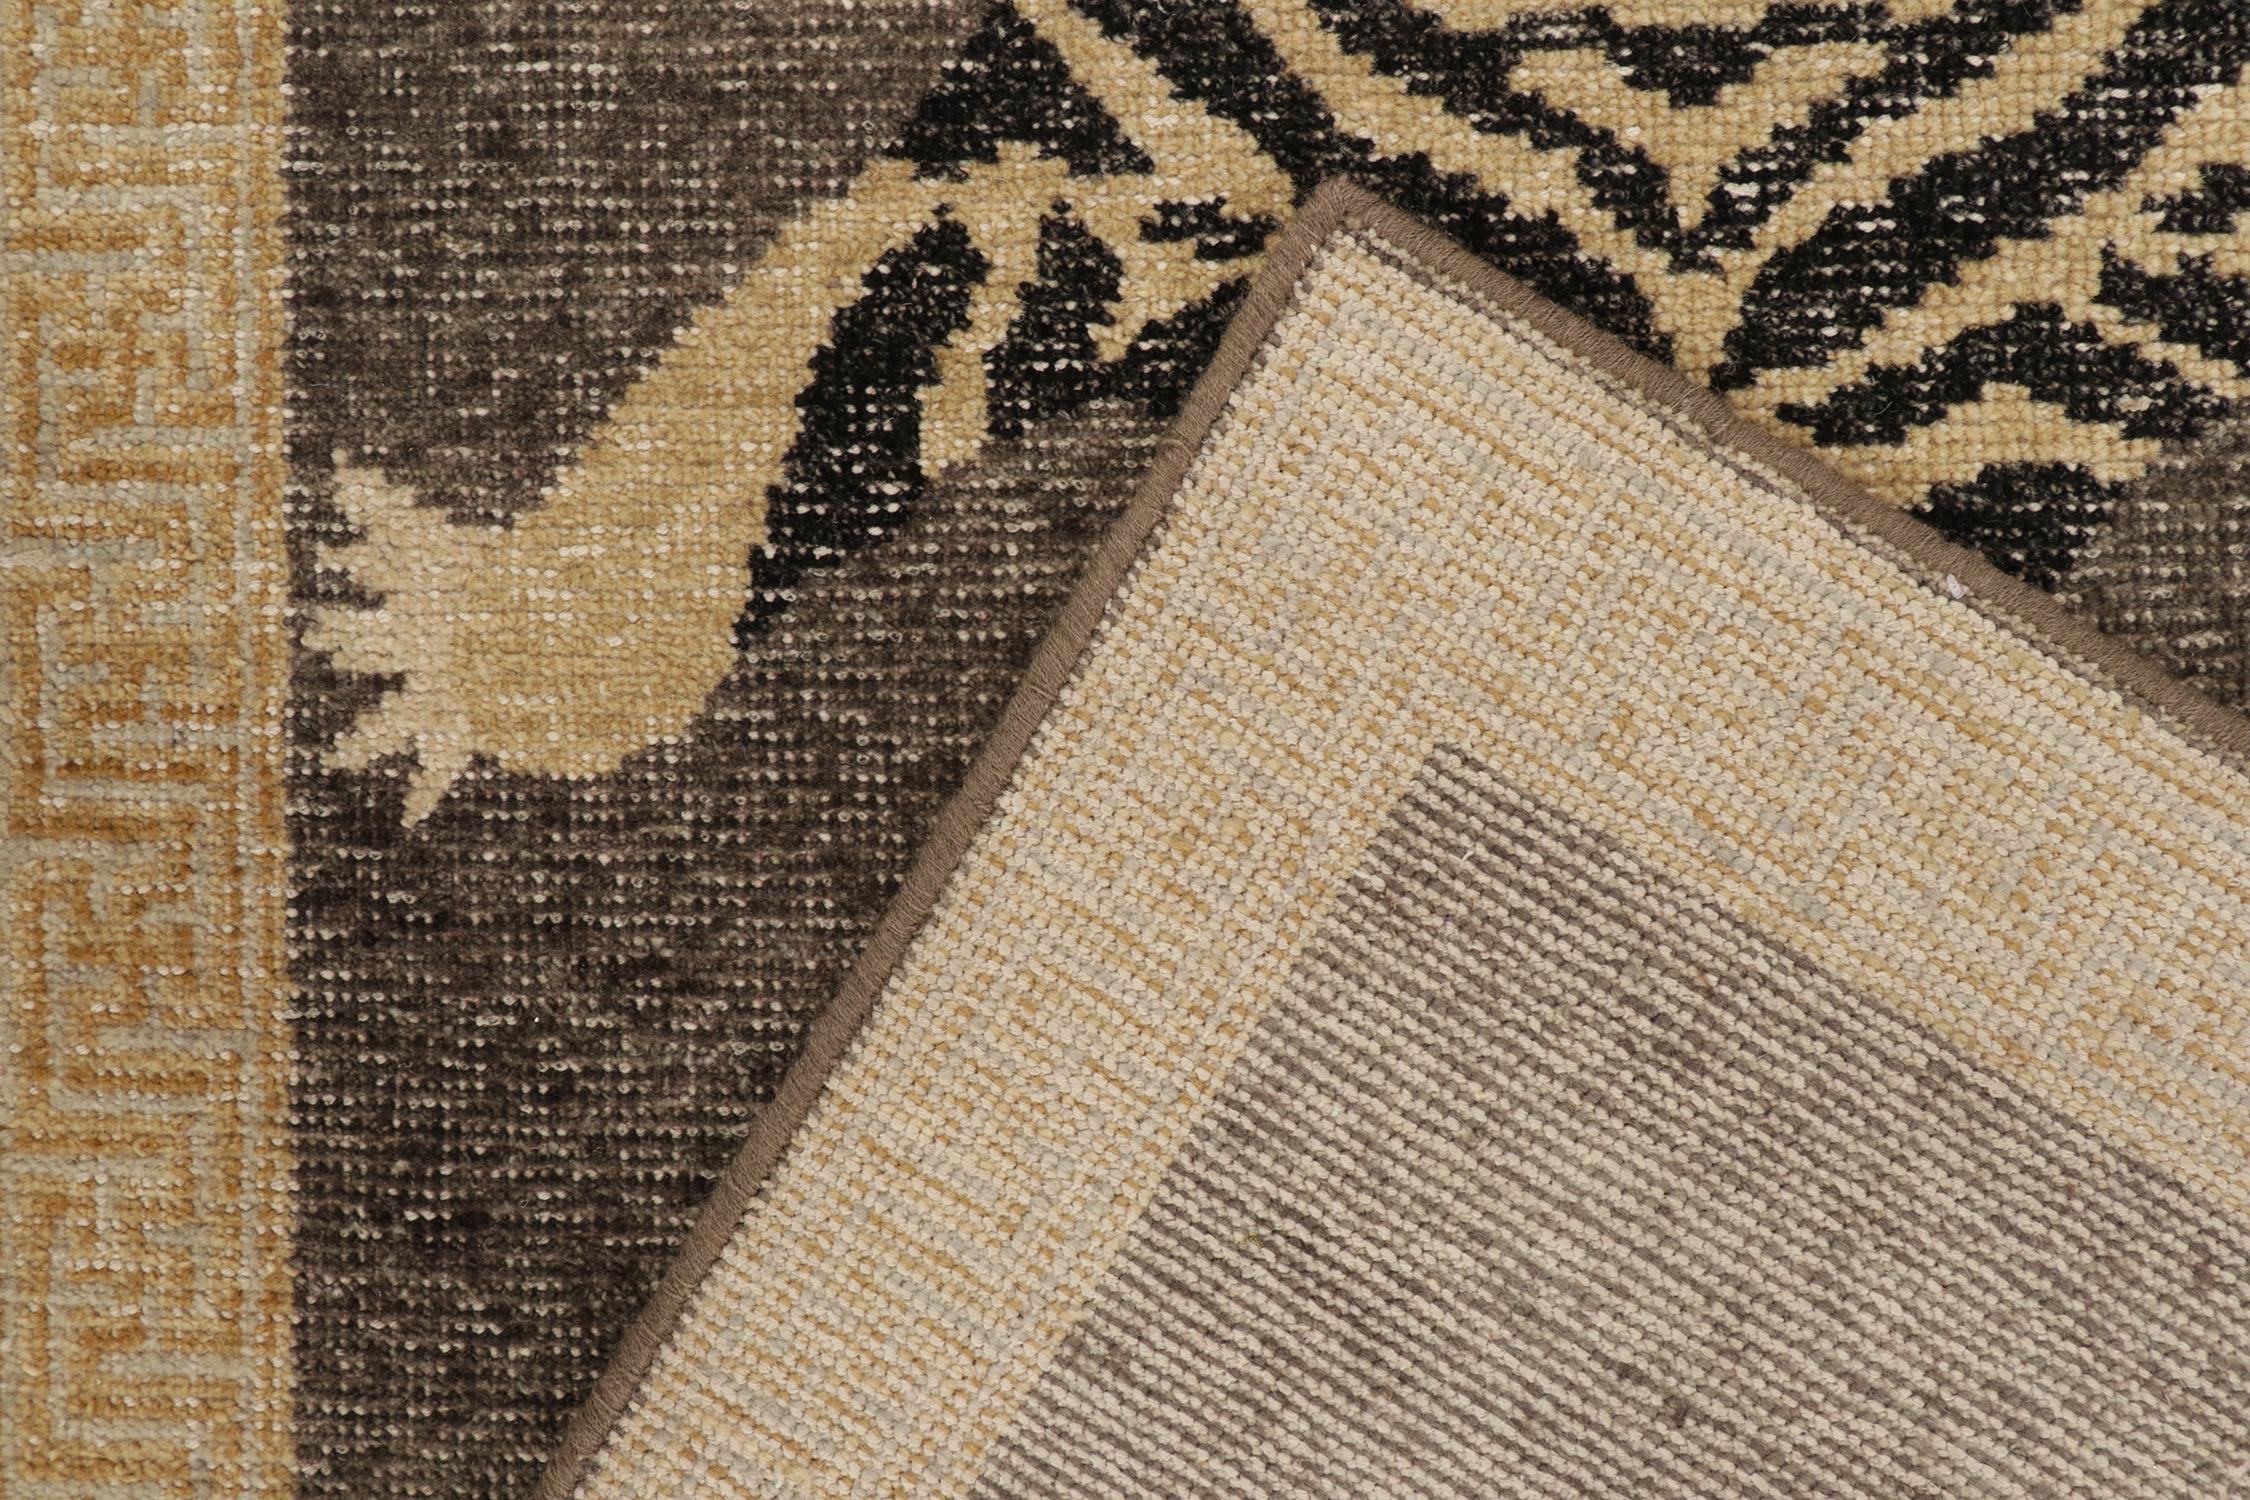 Laine Tapis & Kilim's Distressed Style Tiger Runner in Gray, Beige and Black Pictorial (en anglais) en vente